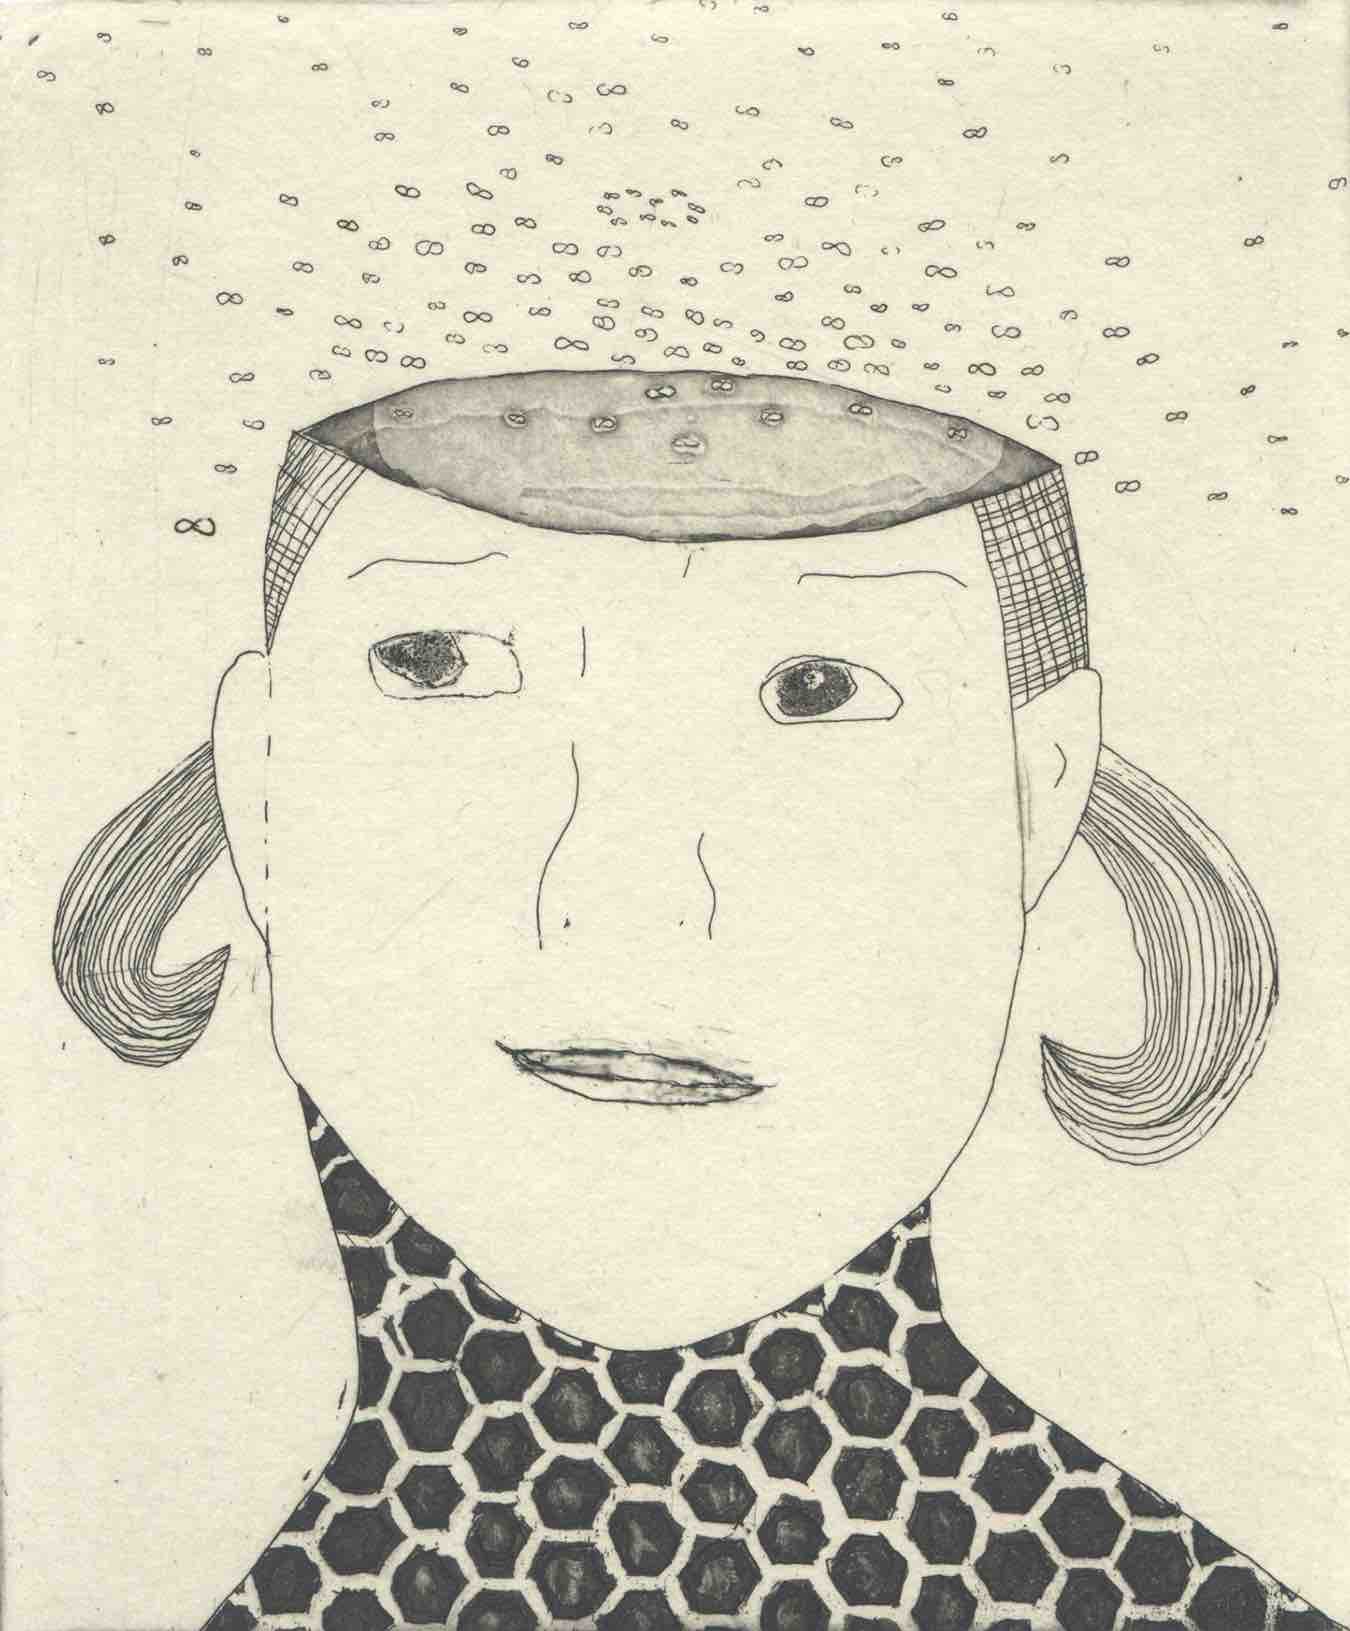 This is a line-drawing print, black on cream. A young female faces us, looking slightly towards the left, with a thoughtful, quizzical expression. Her short hair is in pigtails. Her neck has a dark honeycomb pattern on it. The top of her head is cut off, at the forehead. From inside her skull, a swarm of small infinity symbols emerges like honeybees.